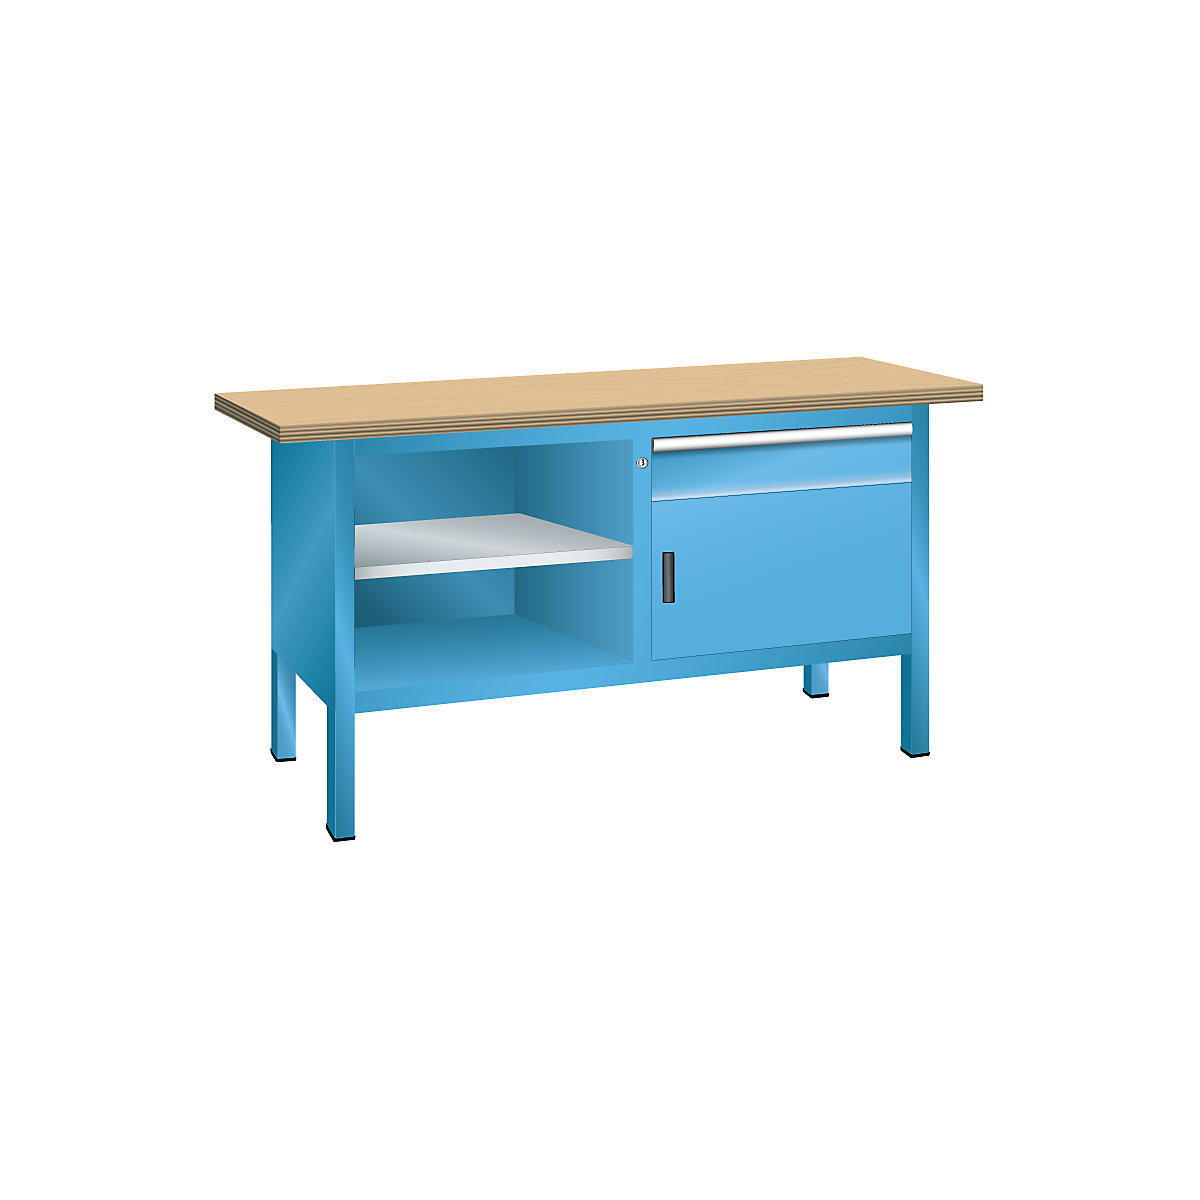 Workbench with multiplex panel, frame construction - LISTA